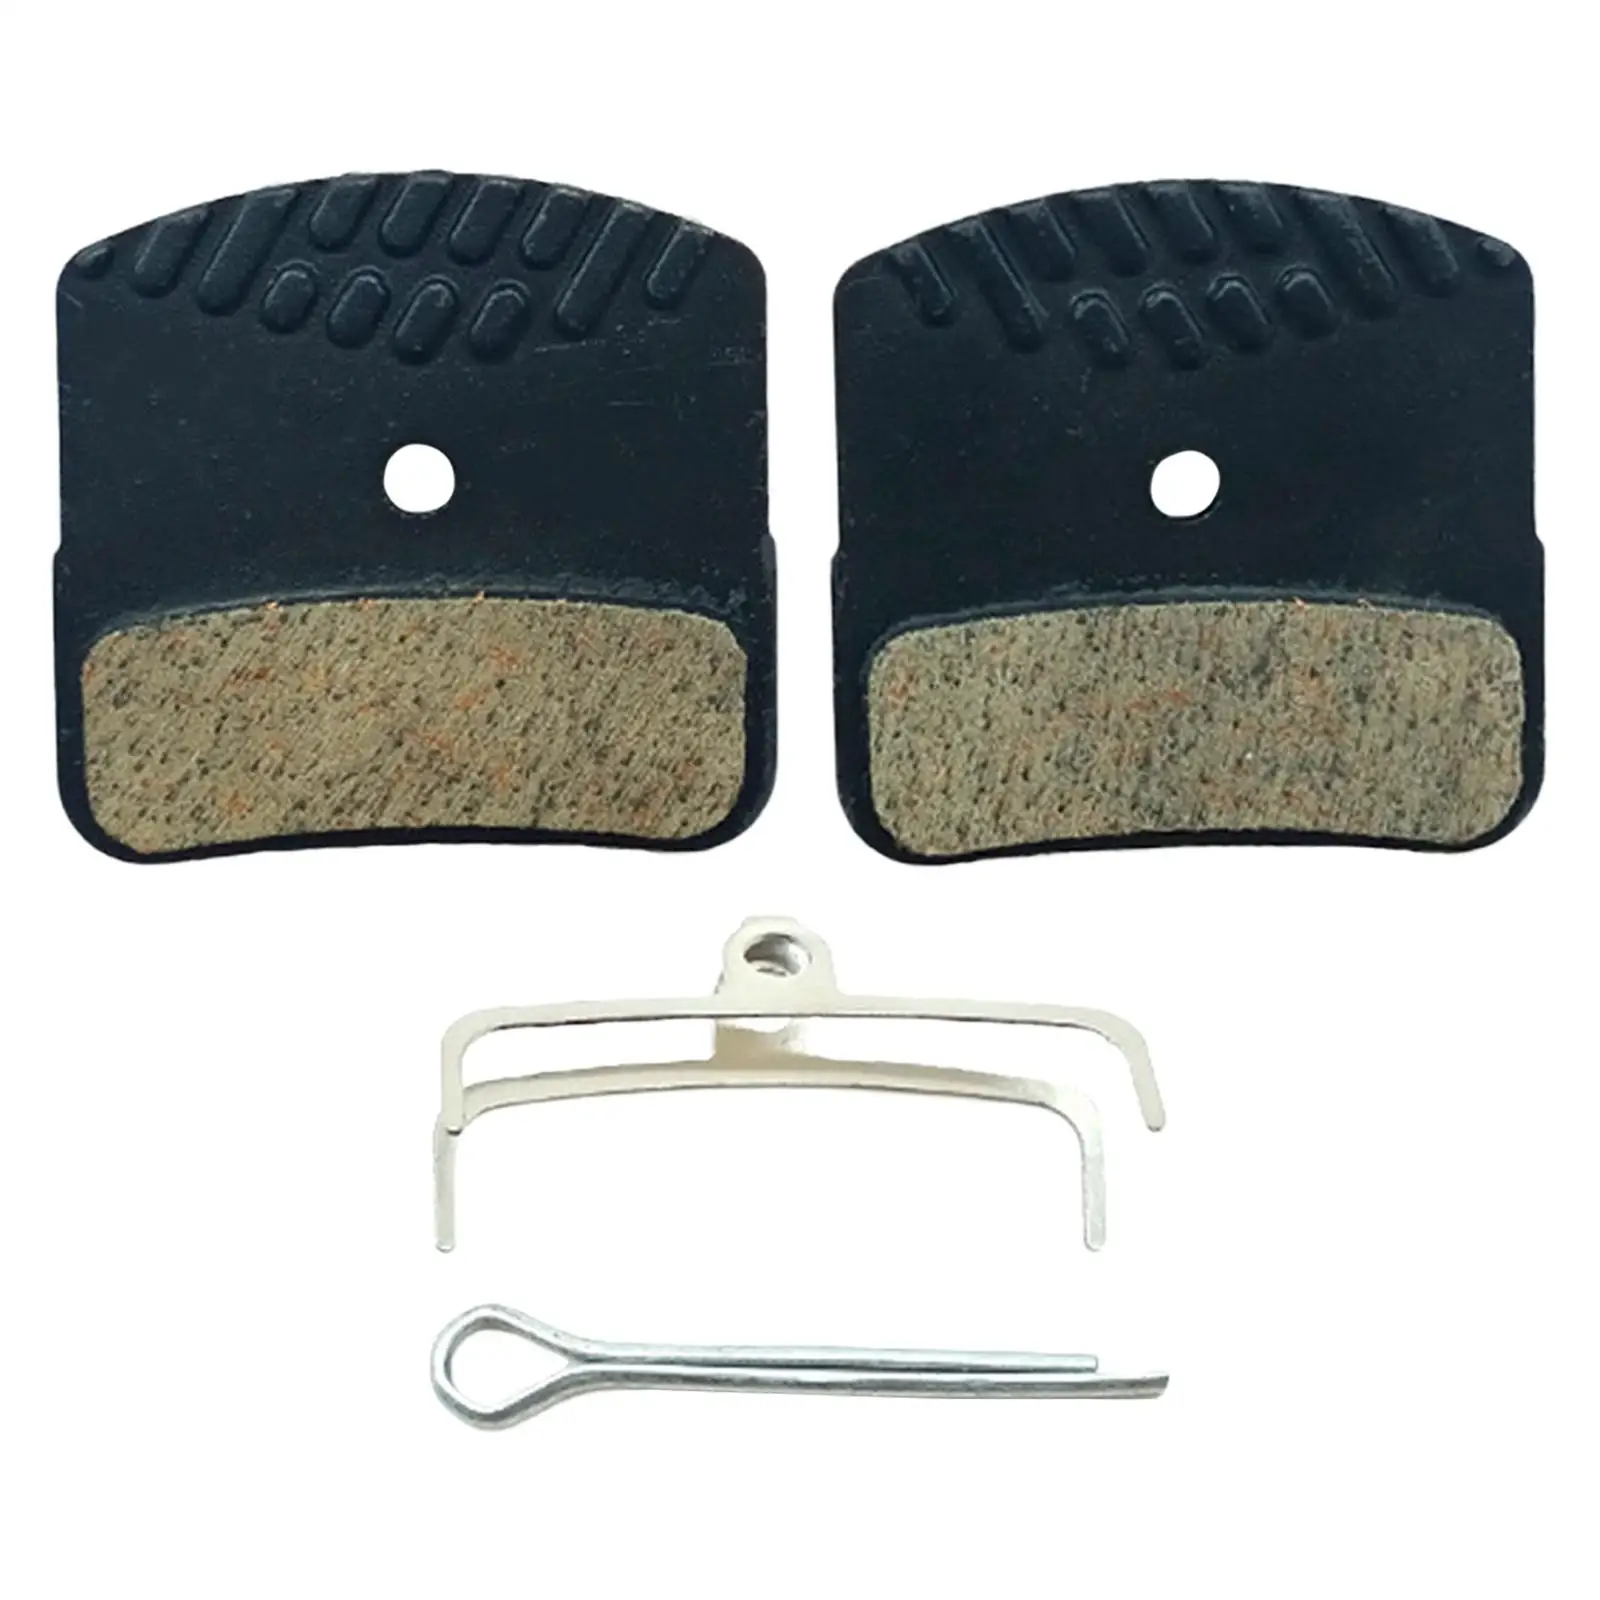 2 Pieces MTB Road Bike Disc Brake Pads Replacement Cooling Fin Bicycle Disc Brake Pad for M9120, M8120, M7120, M810, M640